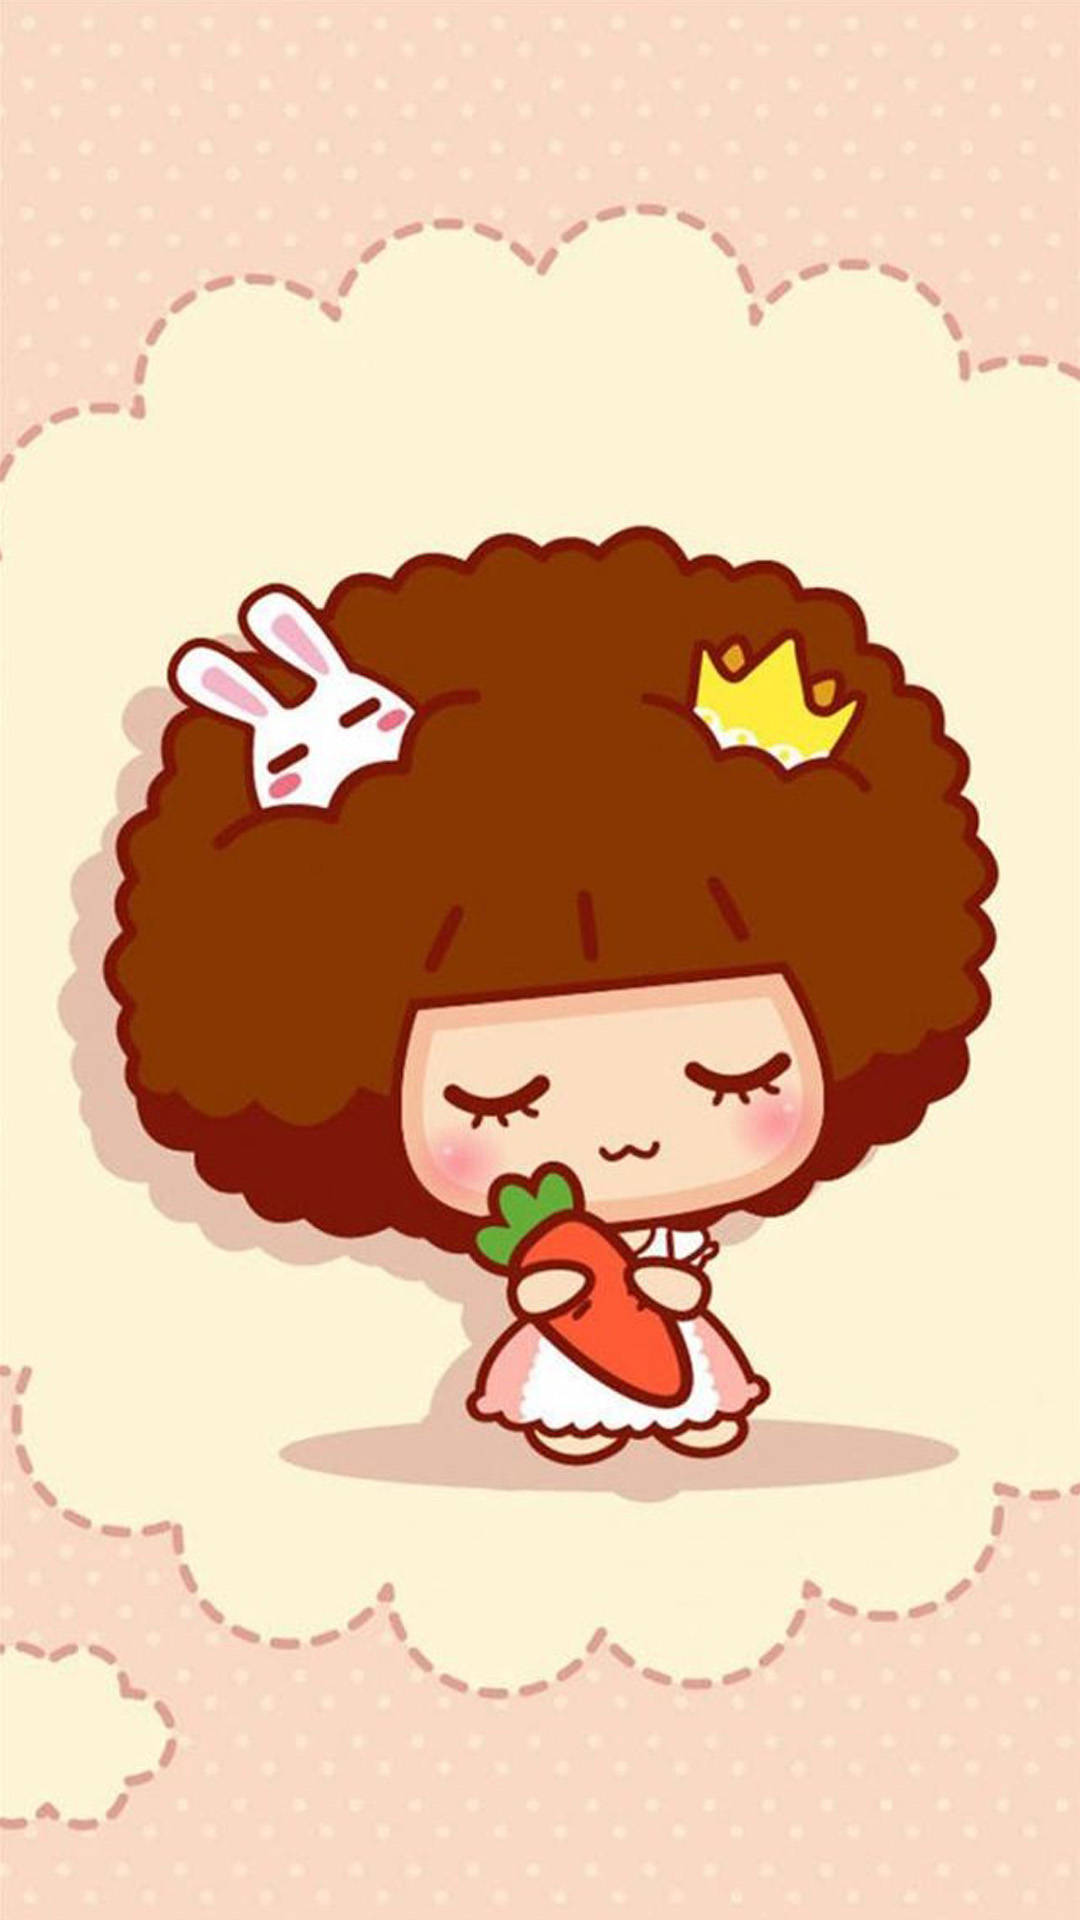 Girl With Curly Hair Cartoon Iphone Background